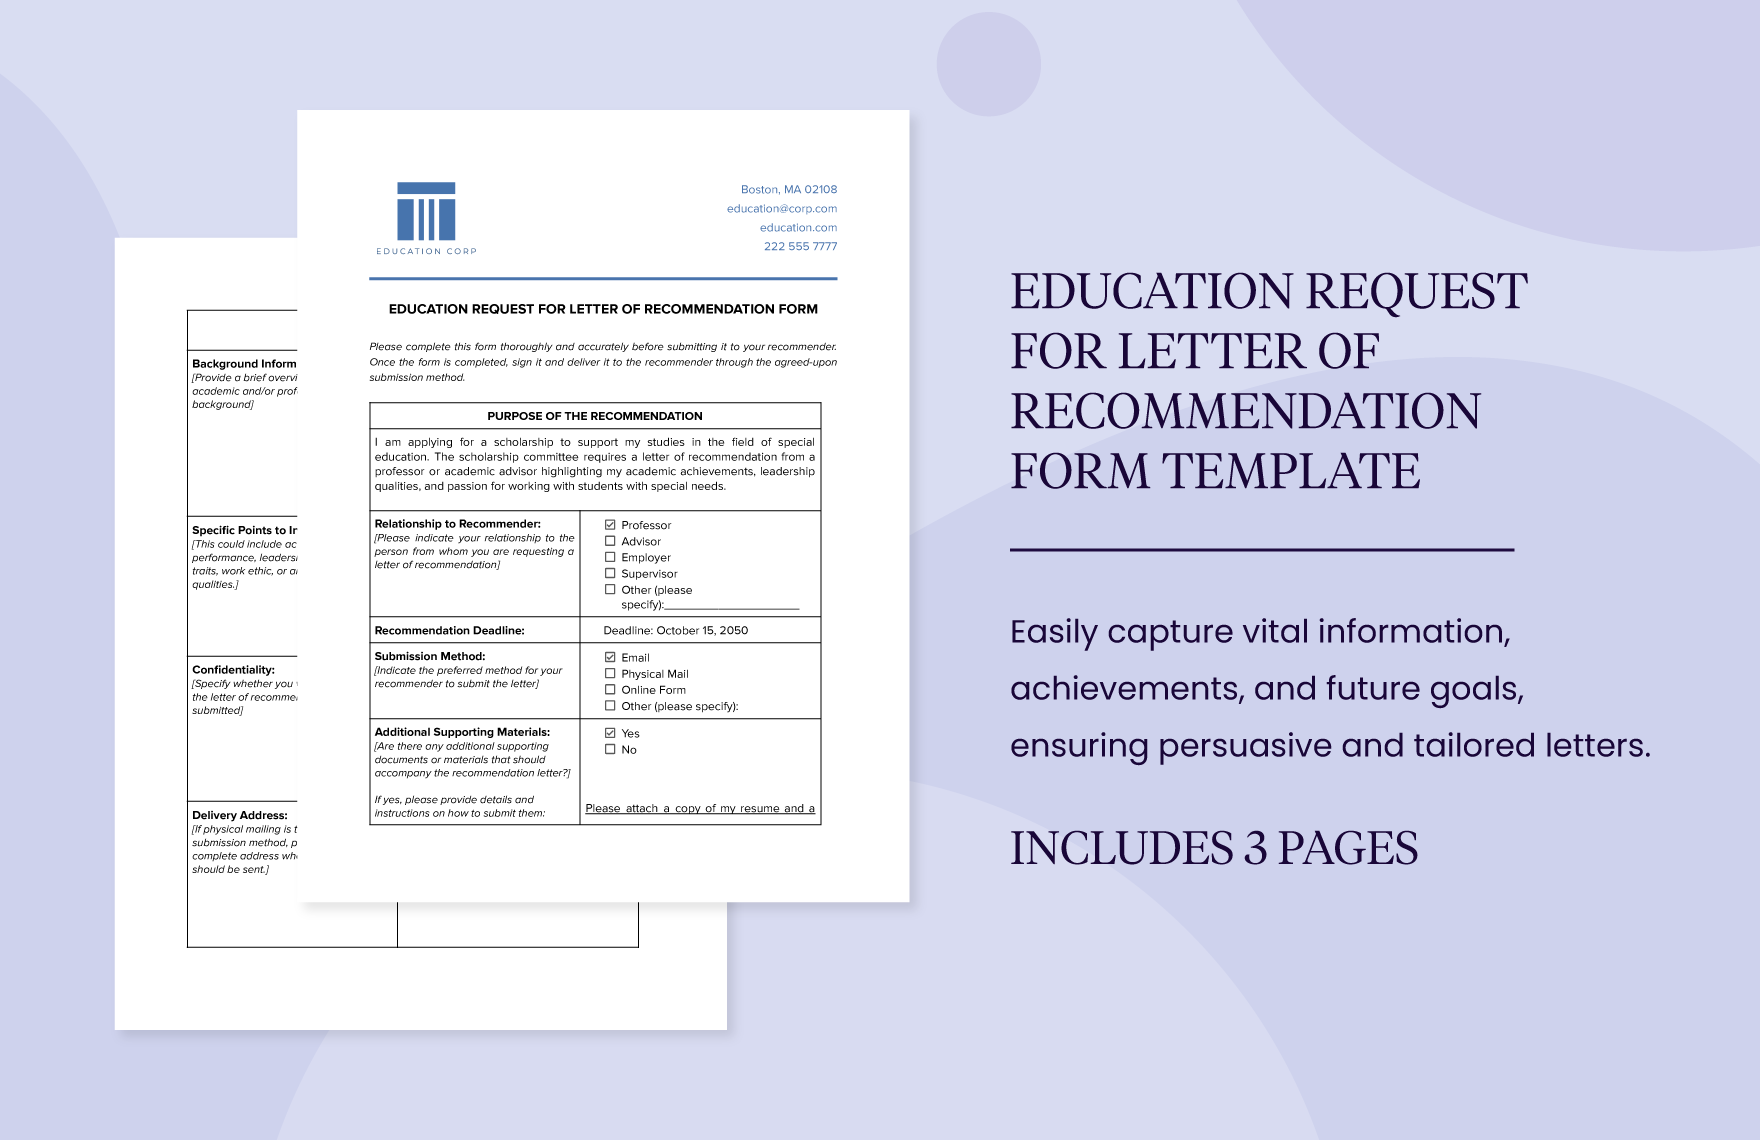 Education Request for Letter of Recommendation Form Template in Word, Google Docs, PDF